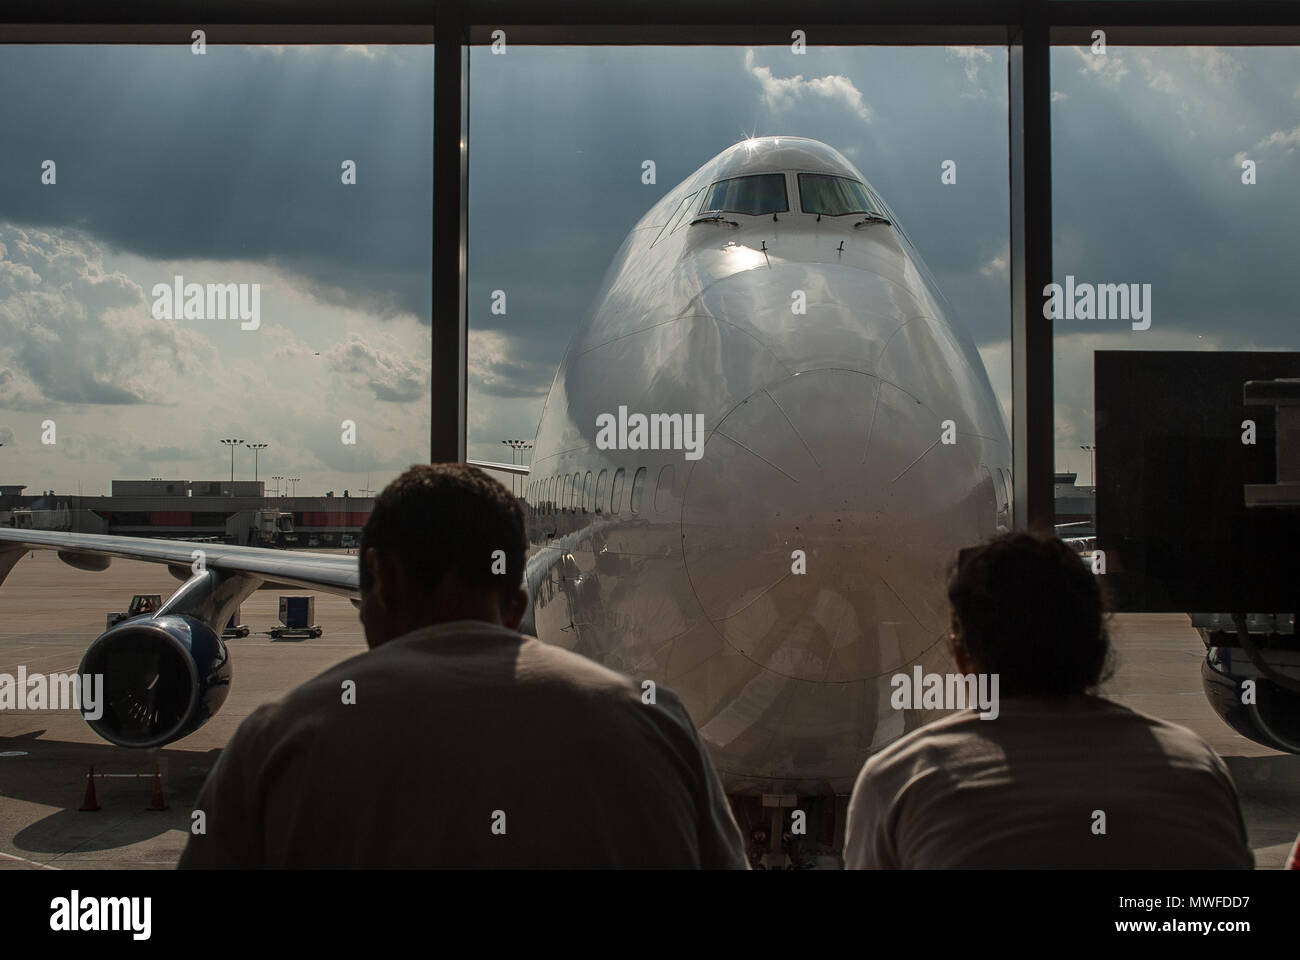 Atlanta airport, Boeing 747, two passengers waiting for departure Stock Photo